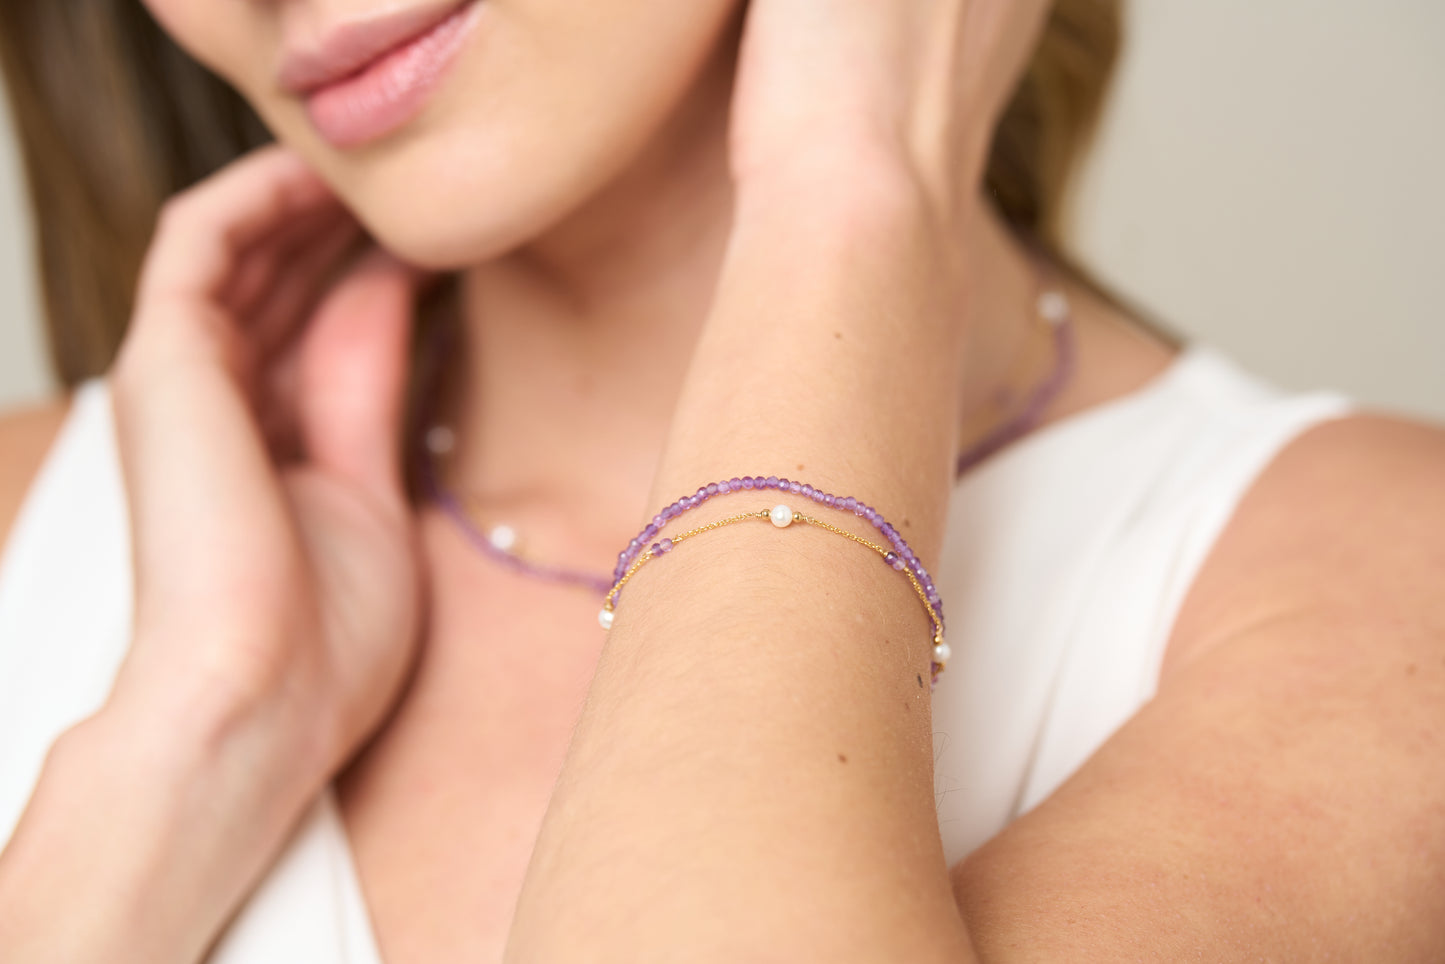 Clara fine double chain bracelet with cultured freshwater pearls & amethyst